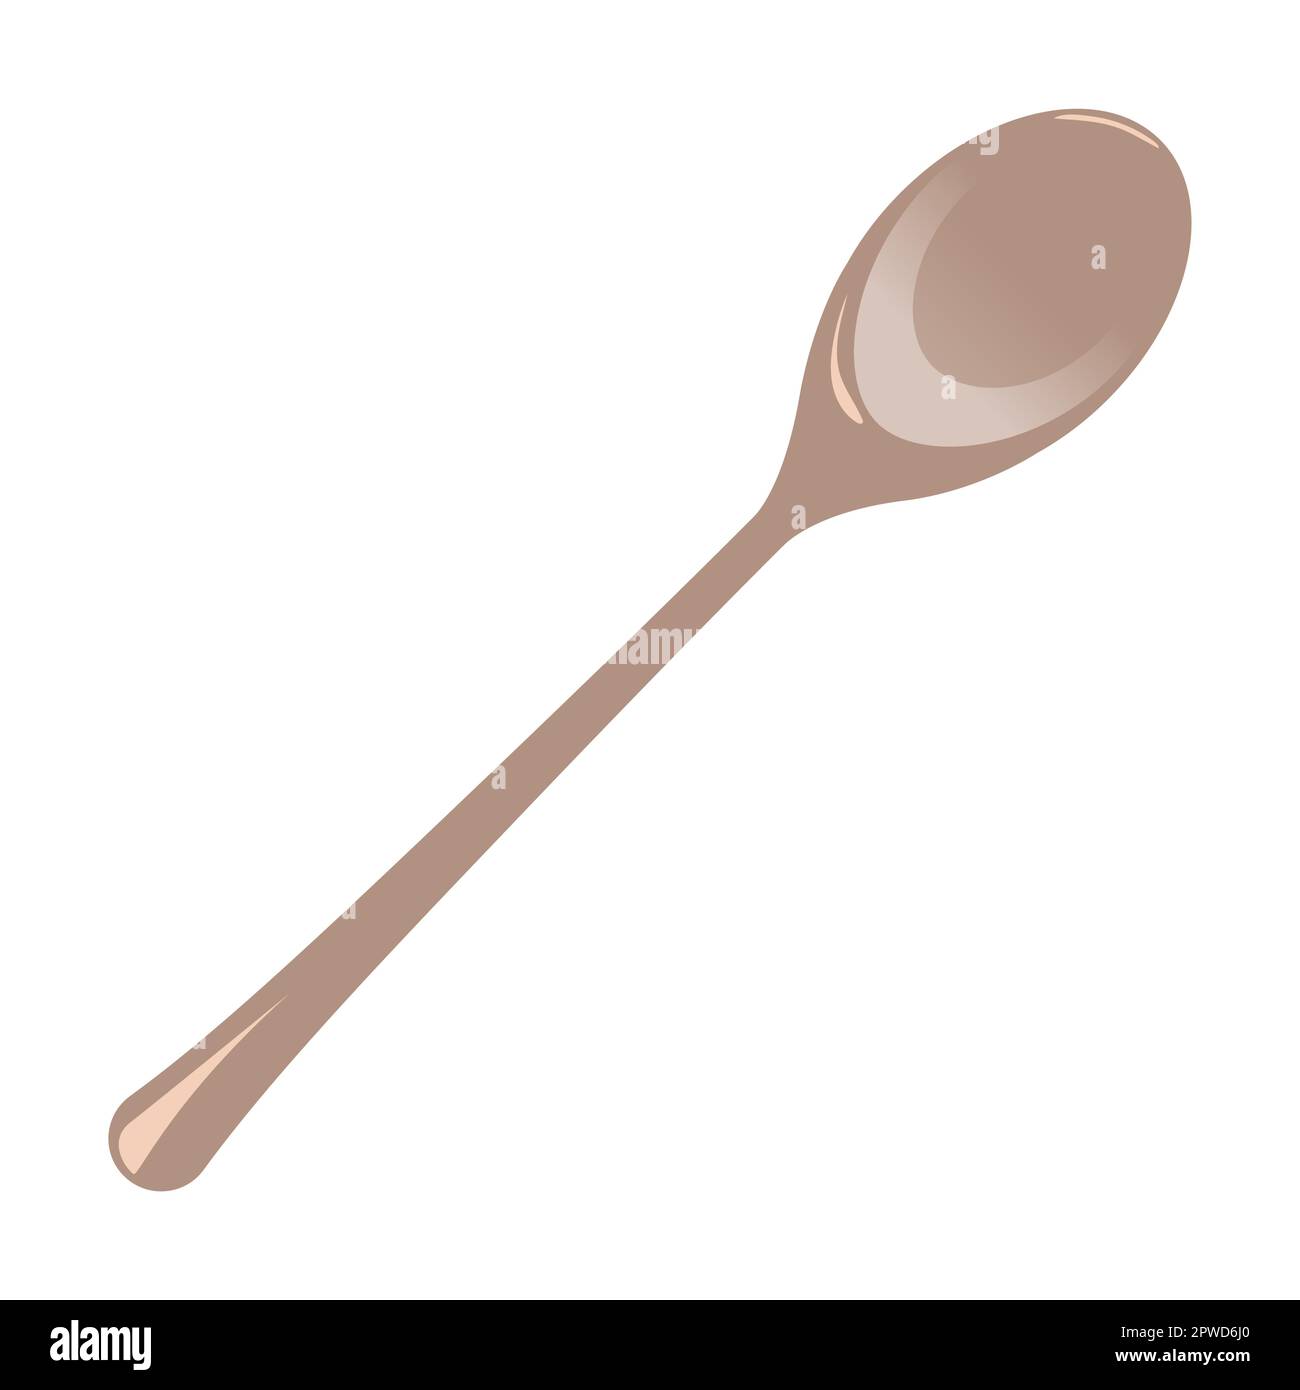 https://c8.alamy.com/comp/2PWD6J0/kitchen-utensil-and-tool-big-spoon-vector-illustration-of-accessory-for-cooking-frying-or-eating-food-cartoon-isolated-on-white-2PWD6J0.jpg